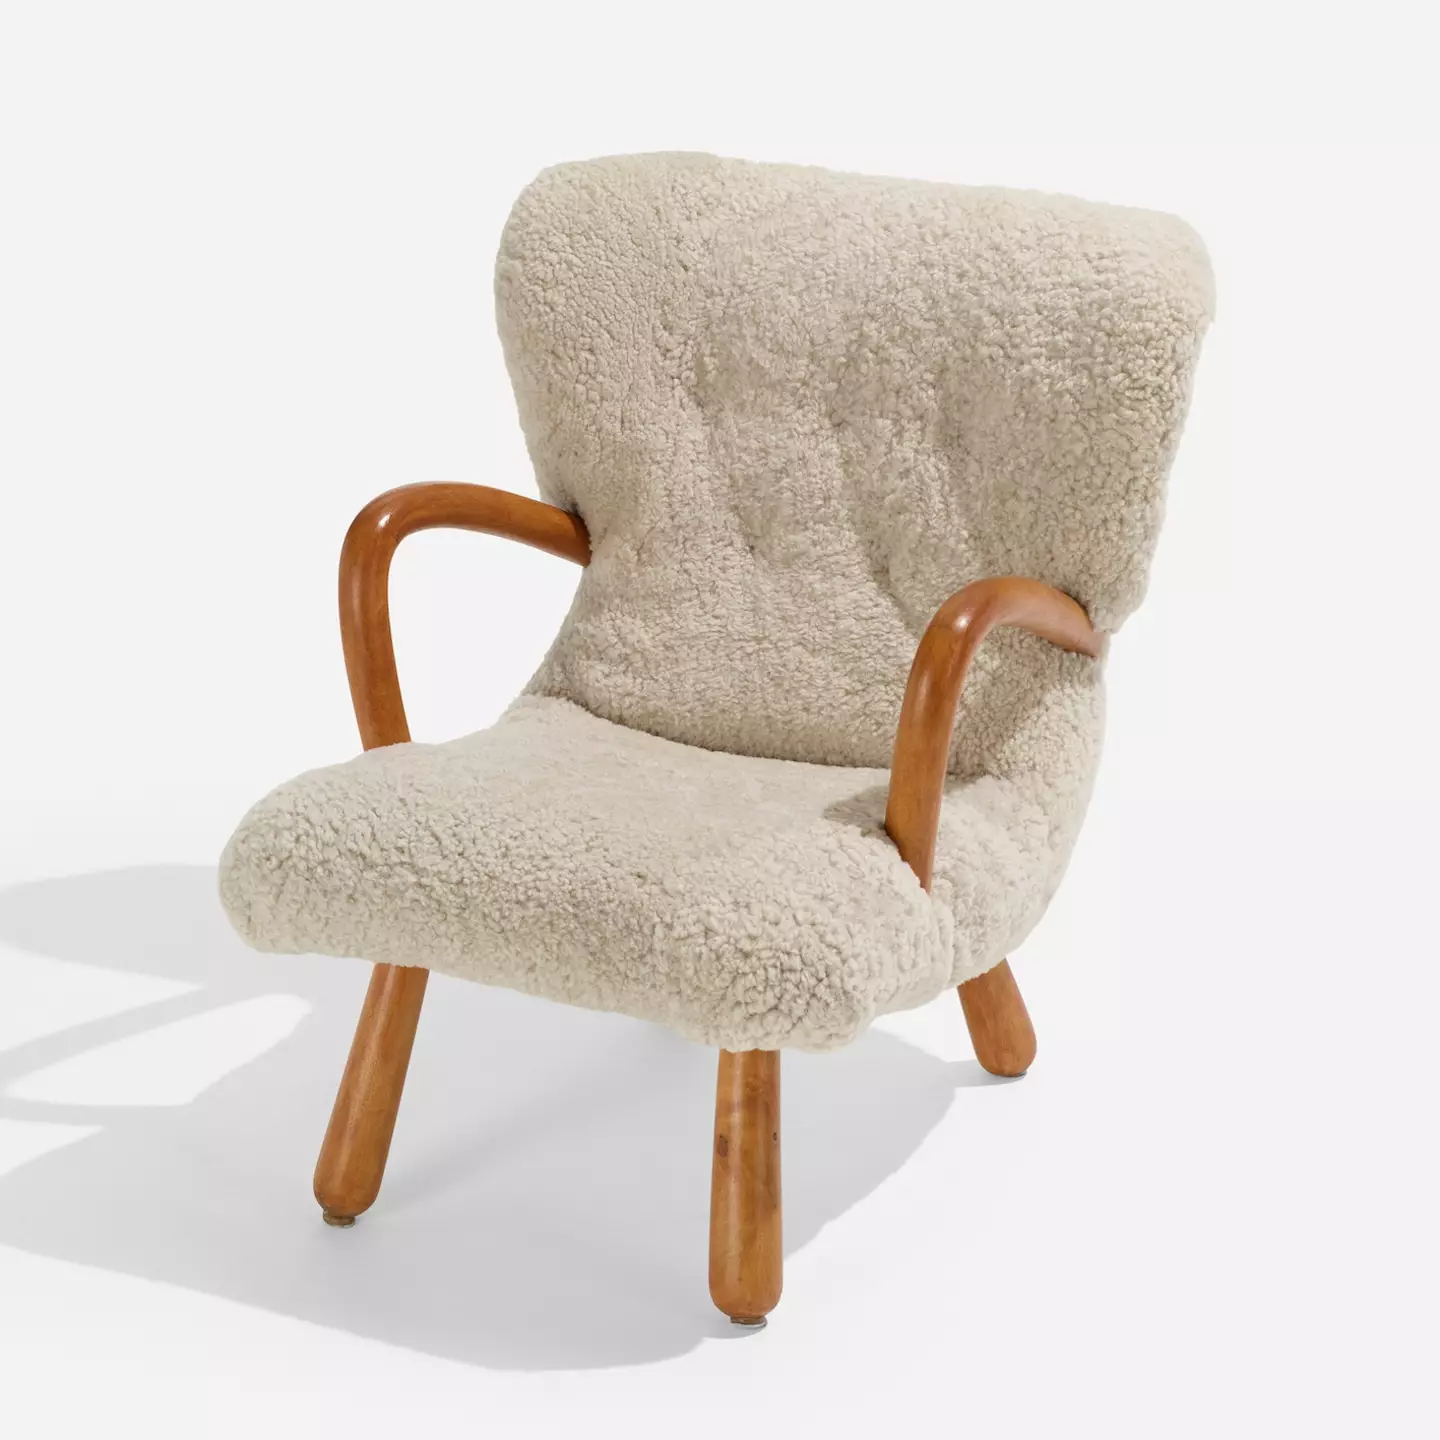 The Åke armchair sold for over £2,000 last month.